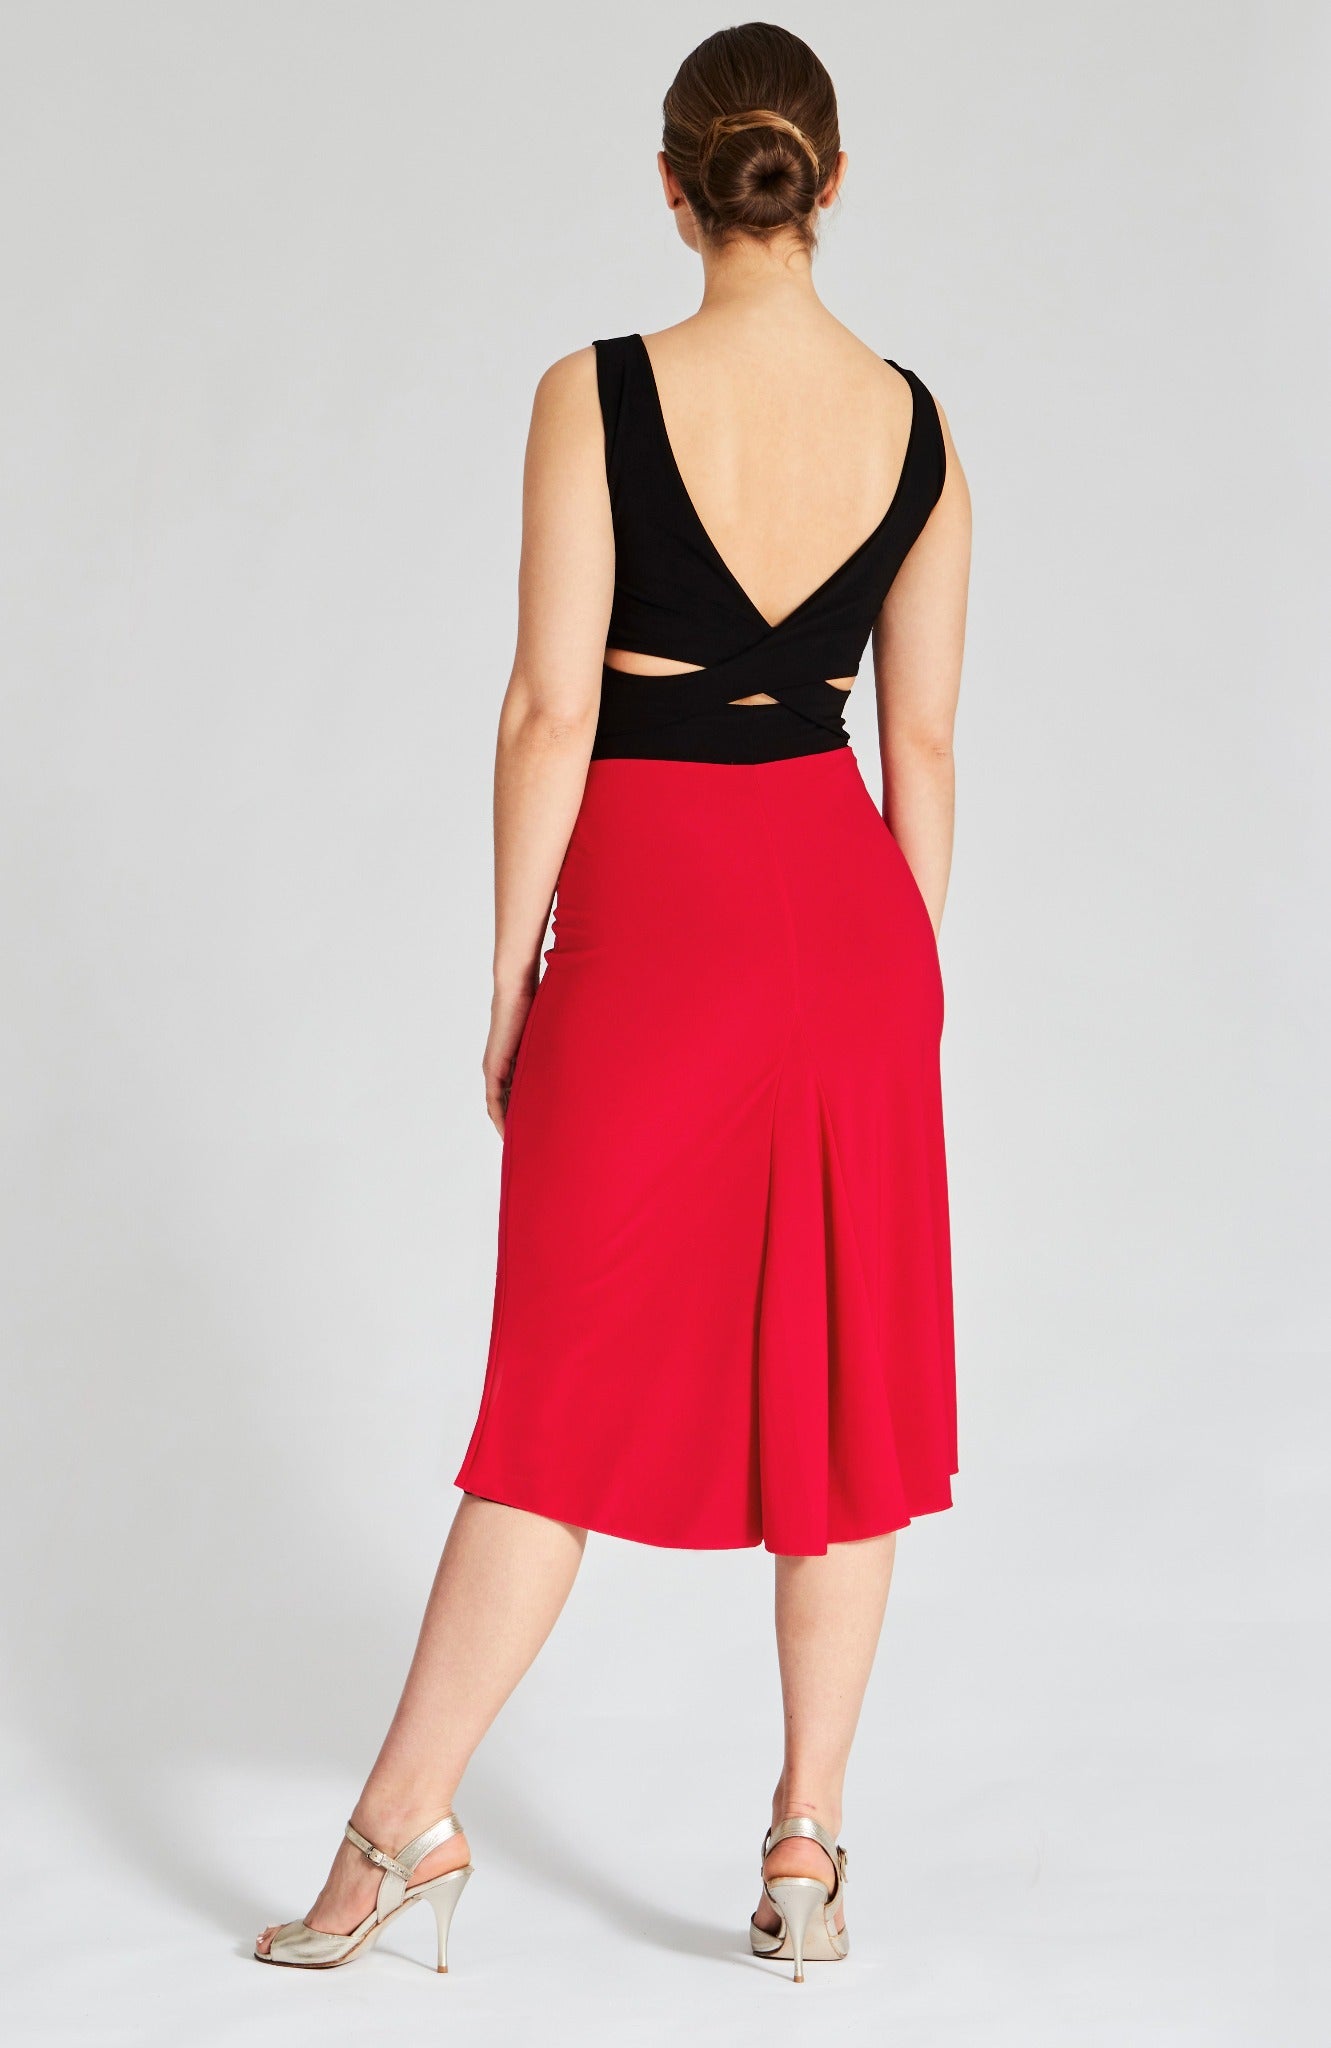 argentine tango skirt in red with black top